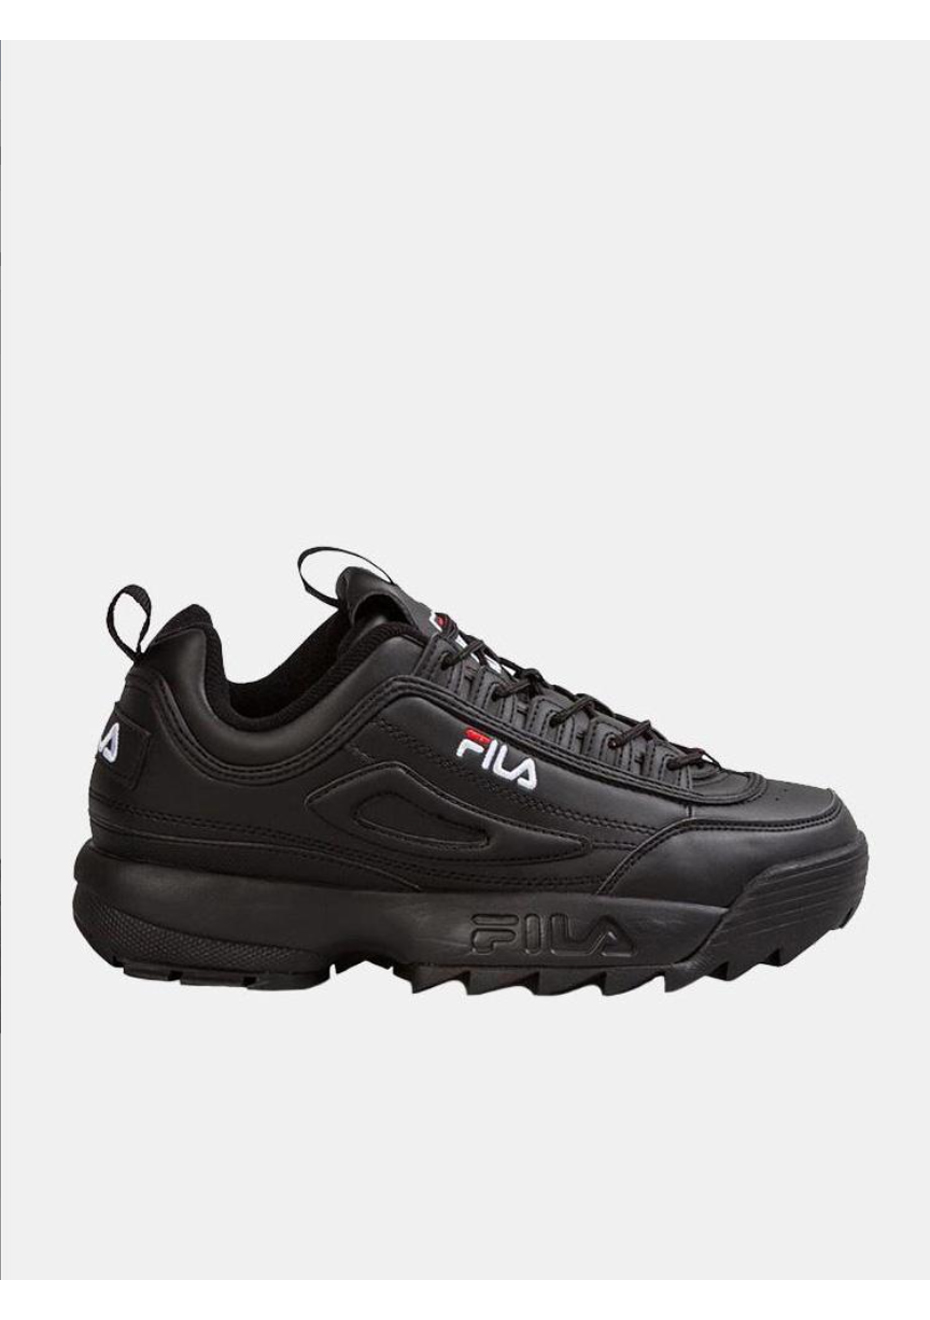 fila rubber shoes for ladies